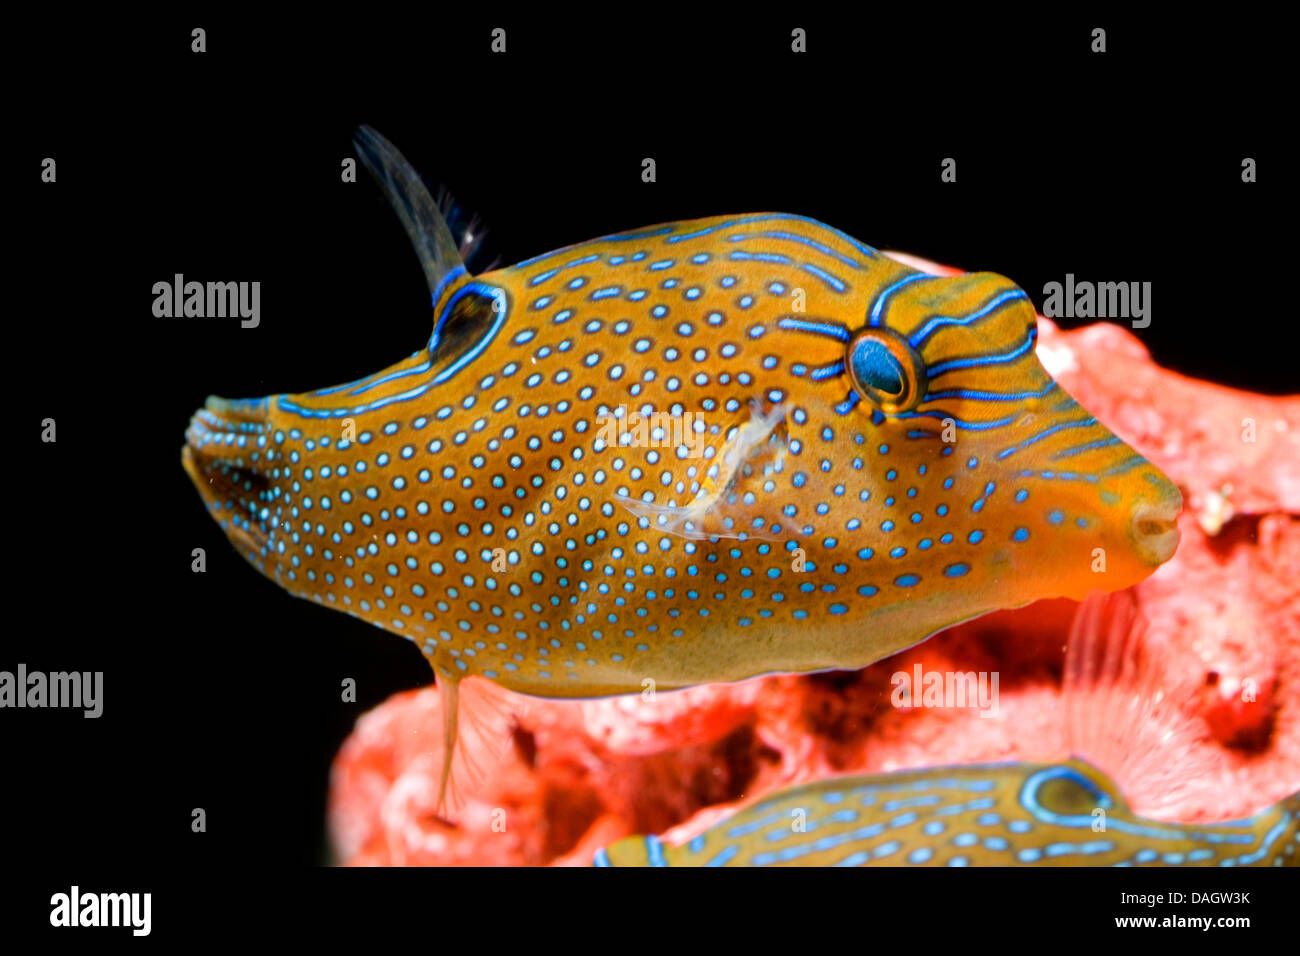 Toby Papua (Canthigaster papua), nuoto Foto Stock